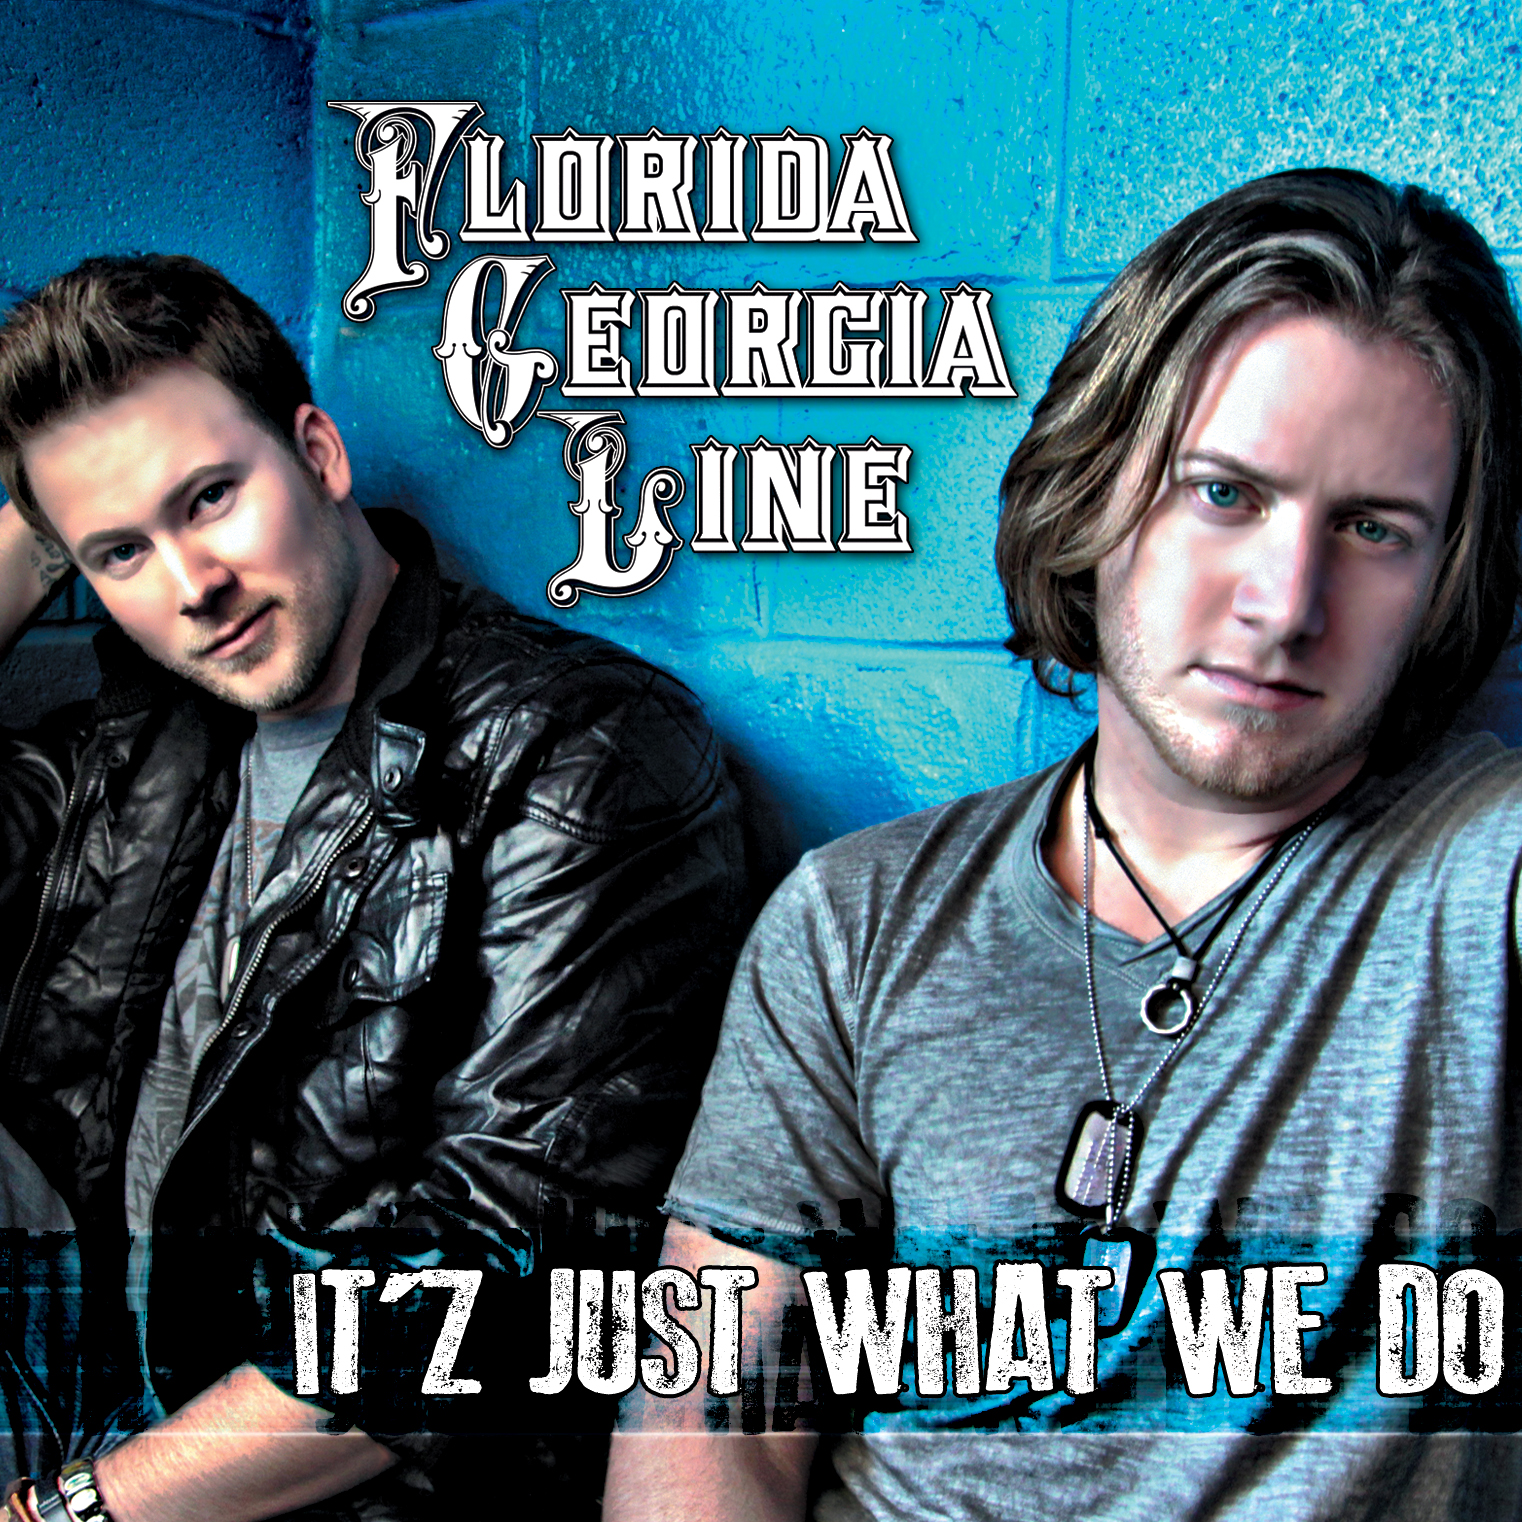 Album Review Florida Georgia Line 'It'z Just What We Do'  FOCUS on